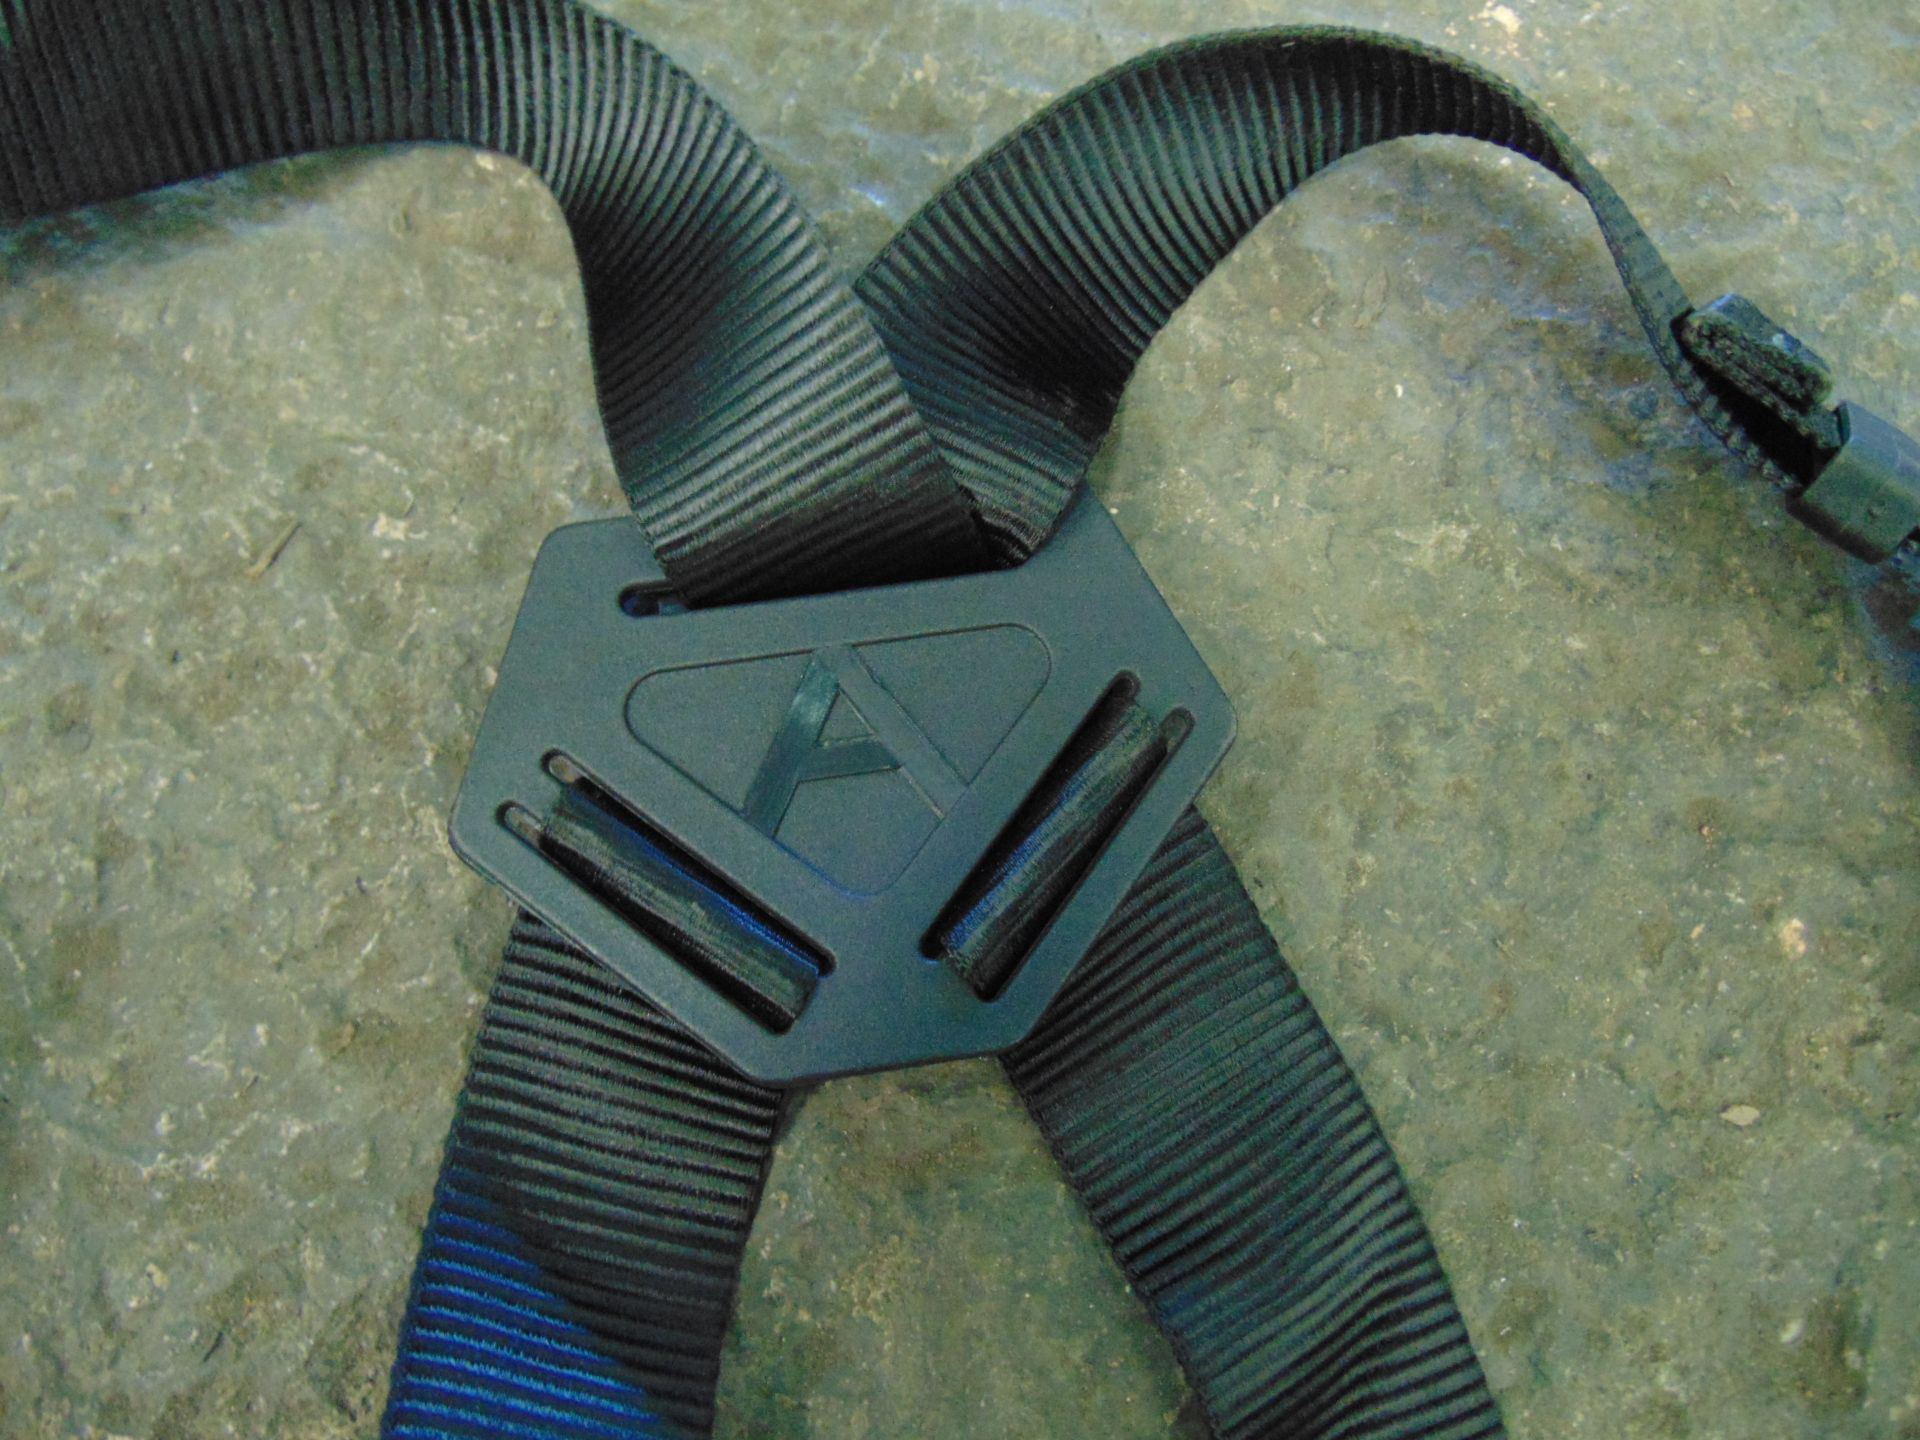 Spanset Full Body Harness with Work Position Lanyards etc - Image 18 of 24